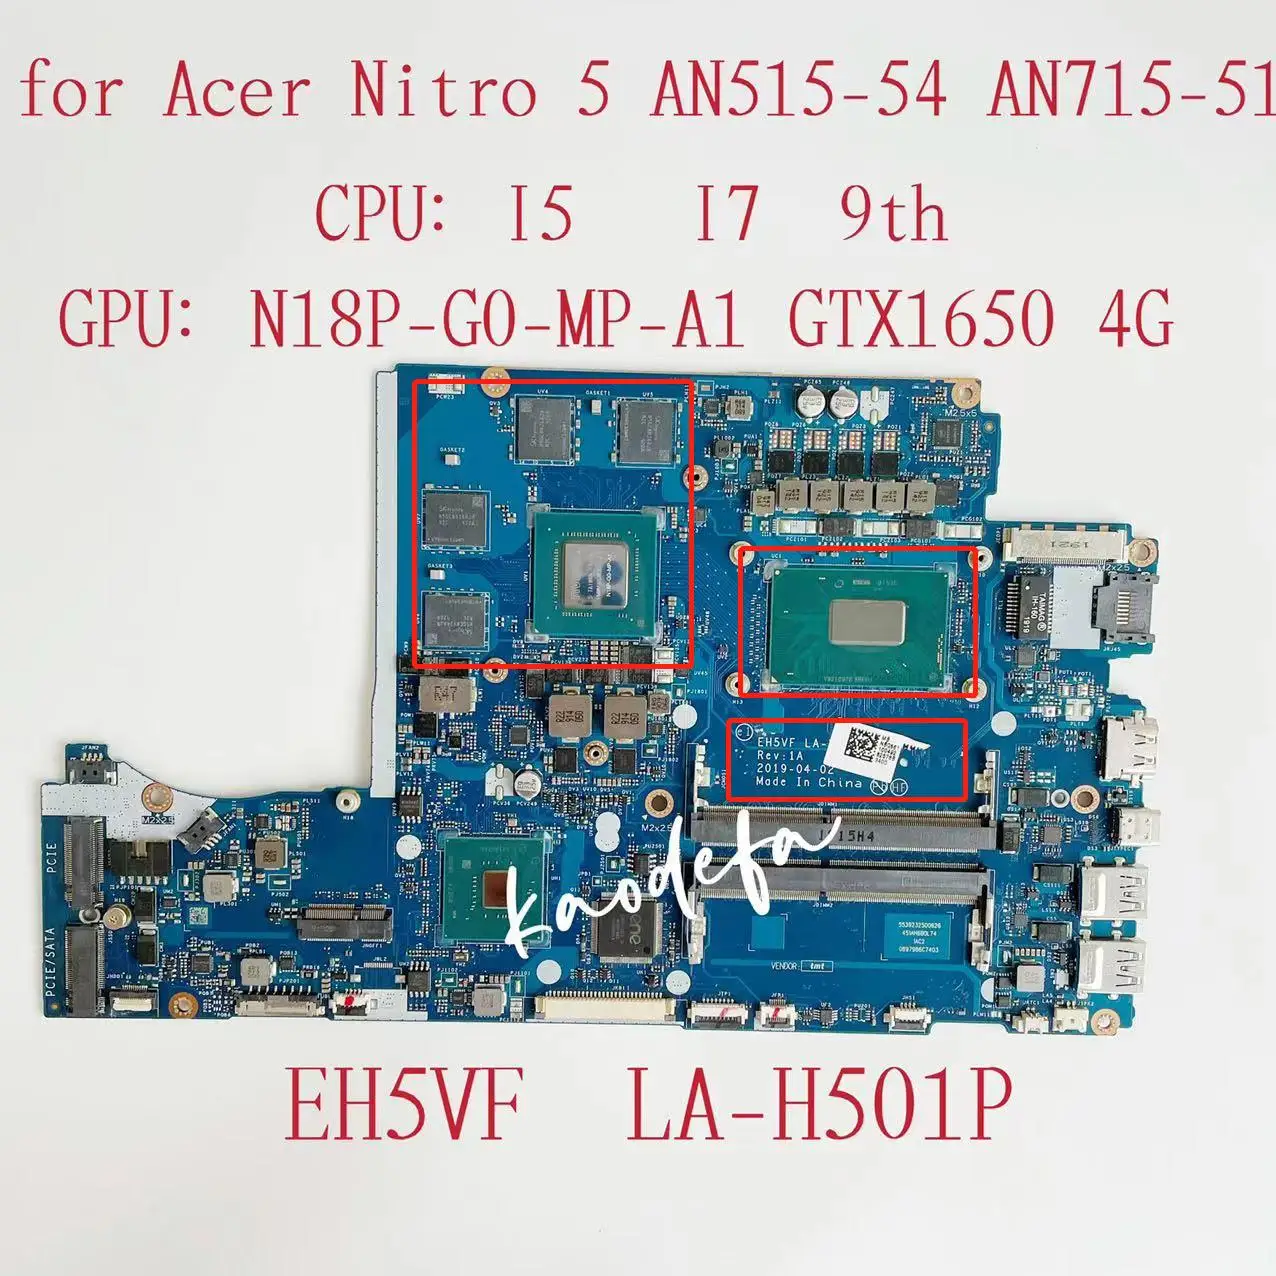 

LA-H501P Mainboard for Acer Nitro 5 AN515-54 AN715-51 Laptop Motherboard CPU: I7-9750H SRF6U GPU:N18P-G0-MP-A1 GTX1650 4G Test